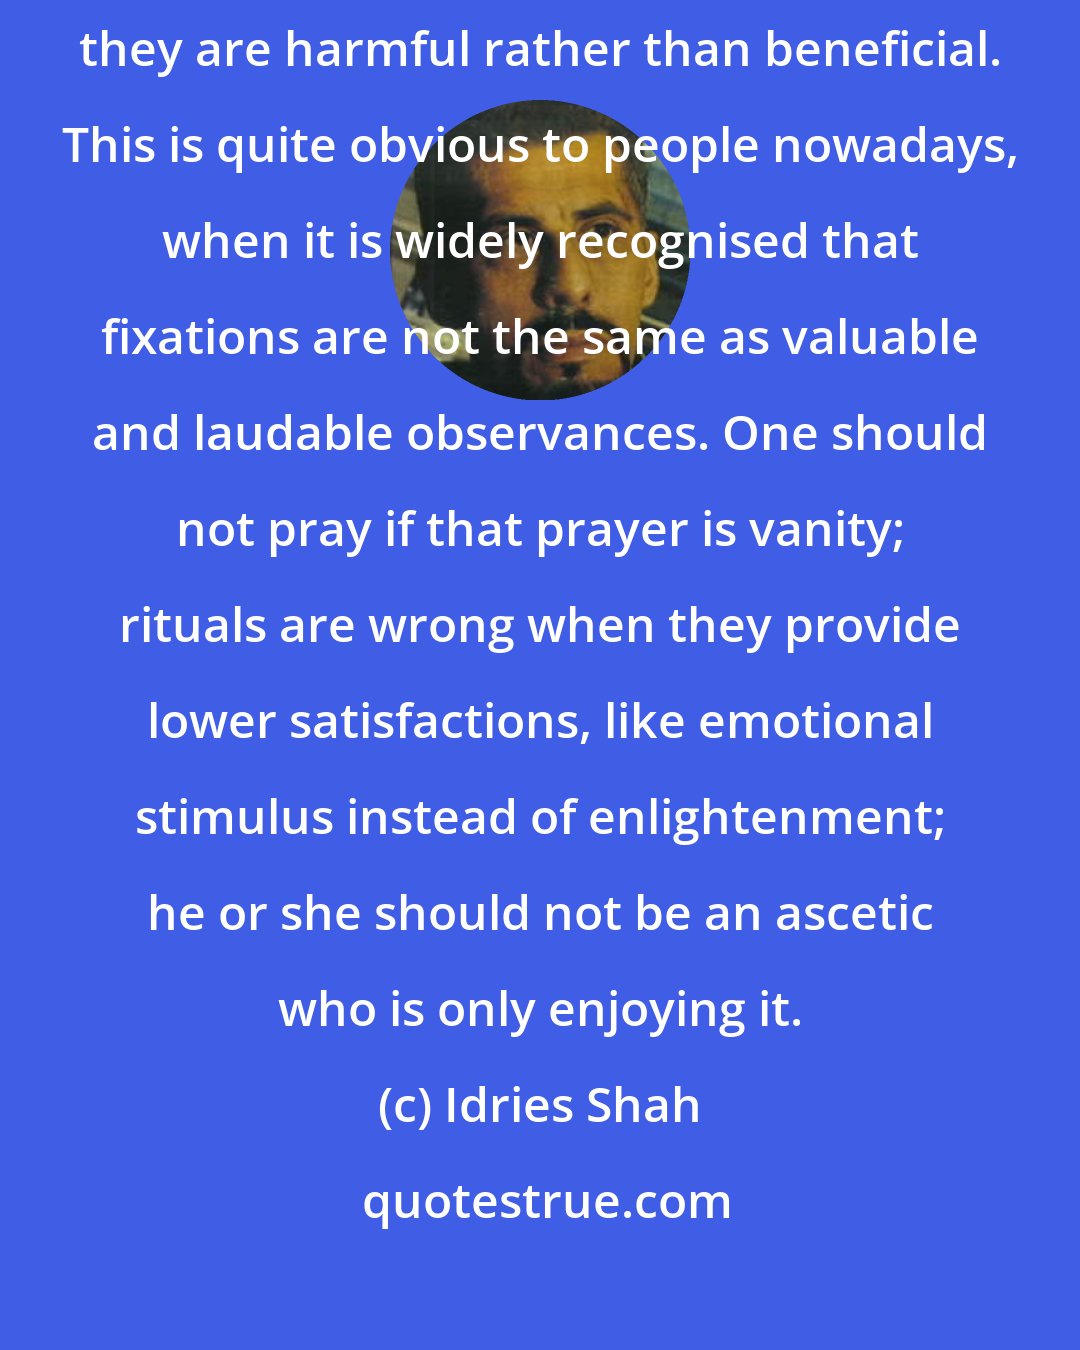 Idries Shah: When prayer, rituals and ascetic life are just a means of self-indulgence, they are harmful rather than beneficial. This is quite obvious to people nowadays, when it is widely recognised that fixations are not the same as valuable and laudable observances. One should not pray if that prayer is vanity; rituals are wrong when they provide lower satisfactions, like emotional stimulus instead of enlightenment; he or she should not be an ascetic who is only enjoying it.